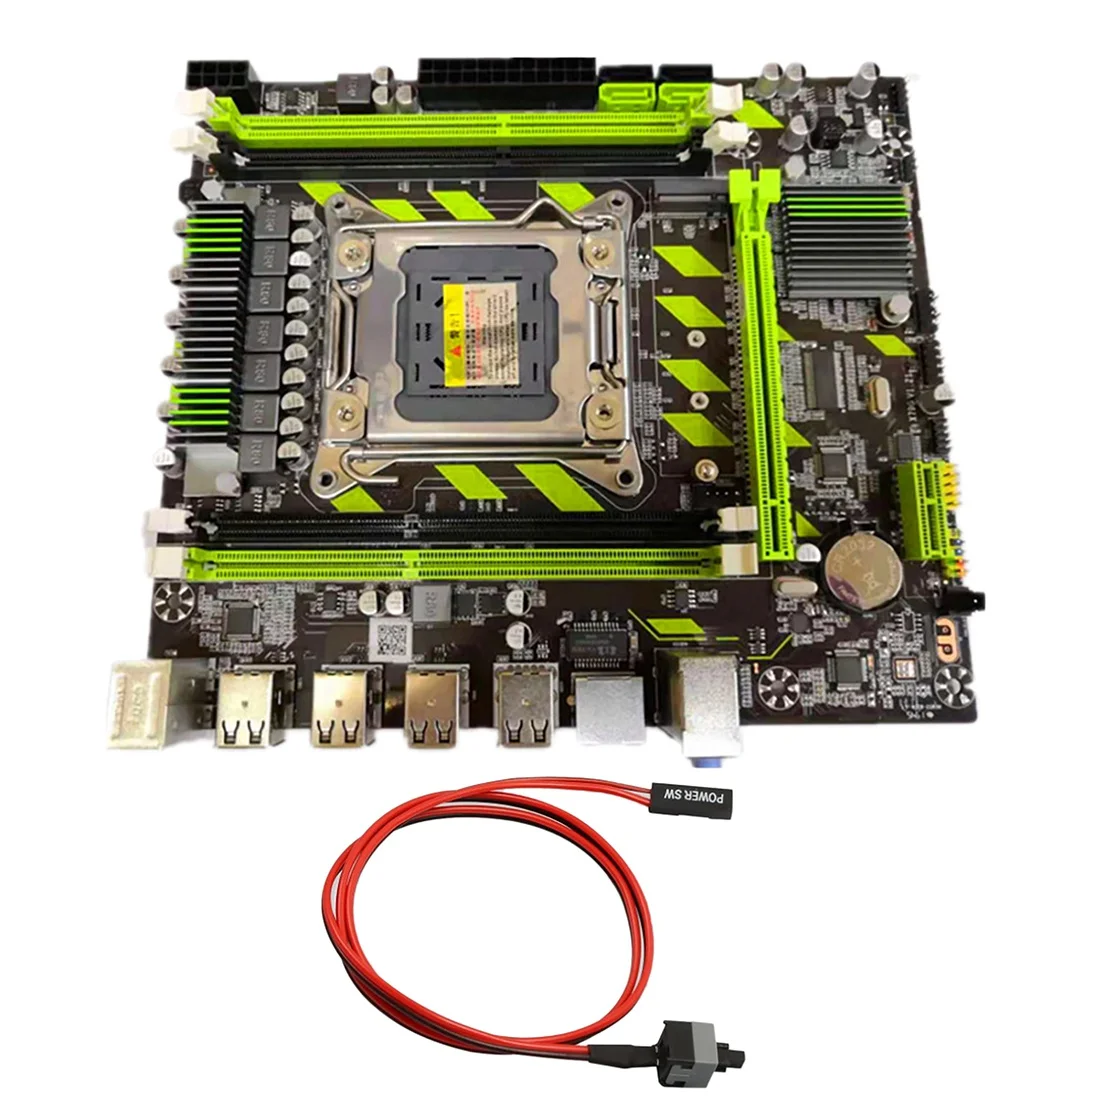 X79 X79G Motherboard with Switch Cable LGA2011 M.2 DDR3 RECC Memory 8 USB PCIE16X SATA3.0 for Intel Xeon E5 Core I7 CPU